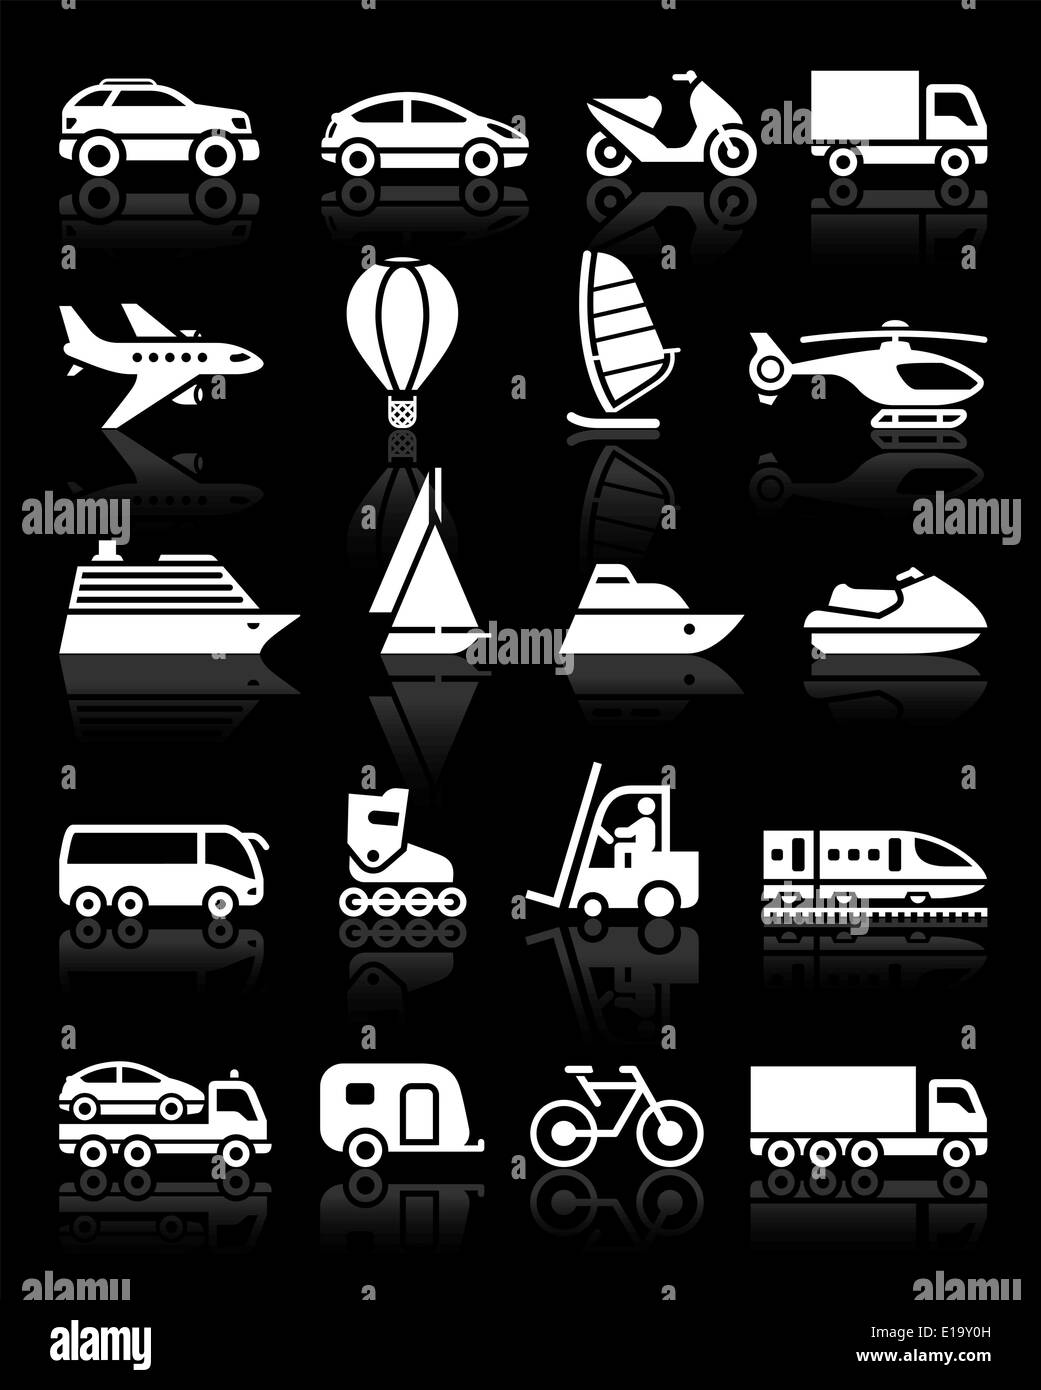 Set of simple transport icons with reflection, black background Stock Vector